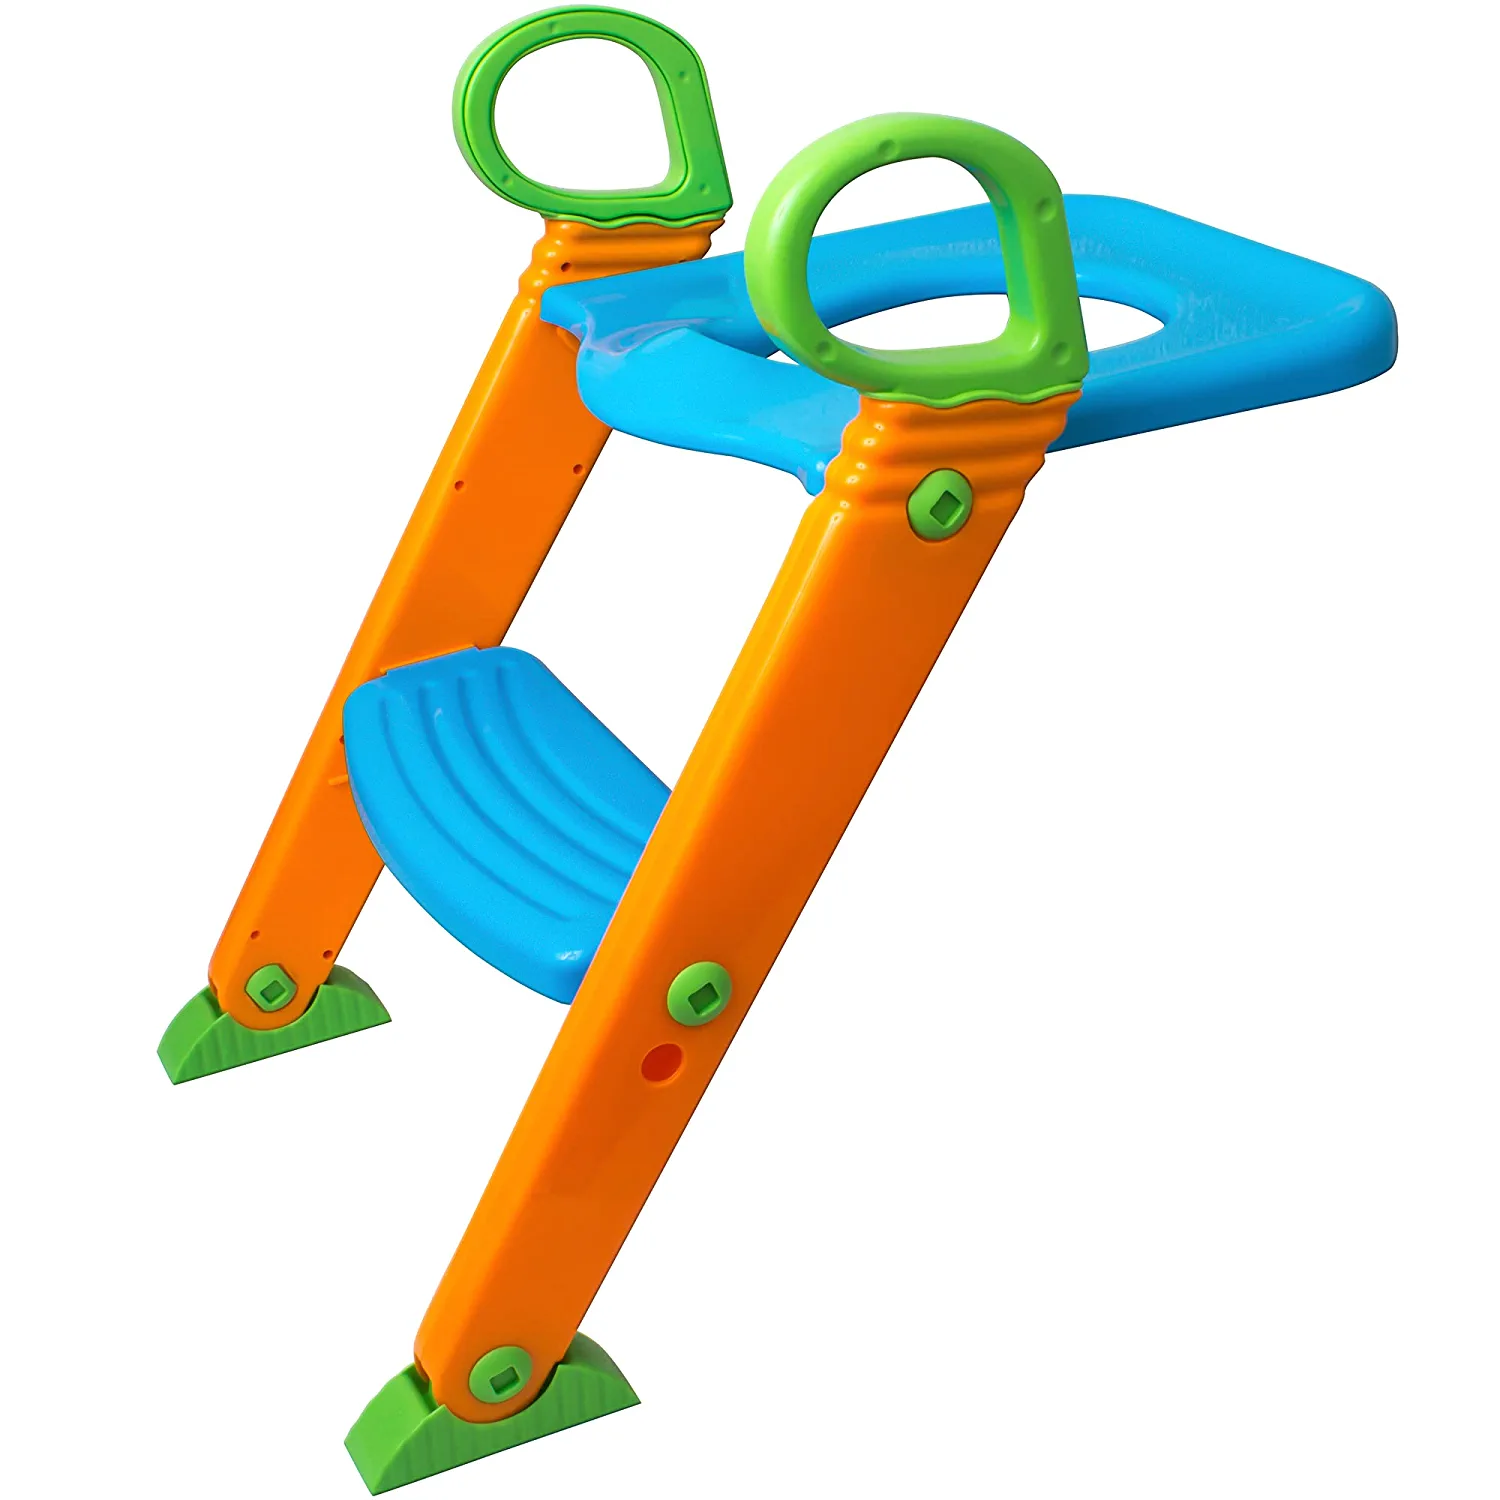 Kazoo Kids Foldable Potty Training Seat with Ladder for Toddlers Unisex - image 1 of 7